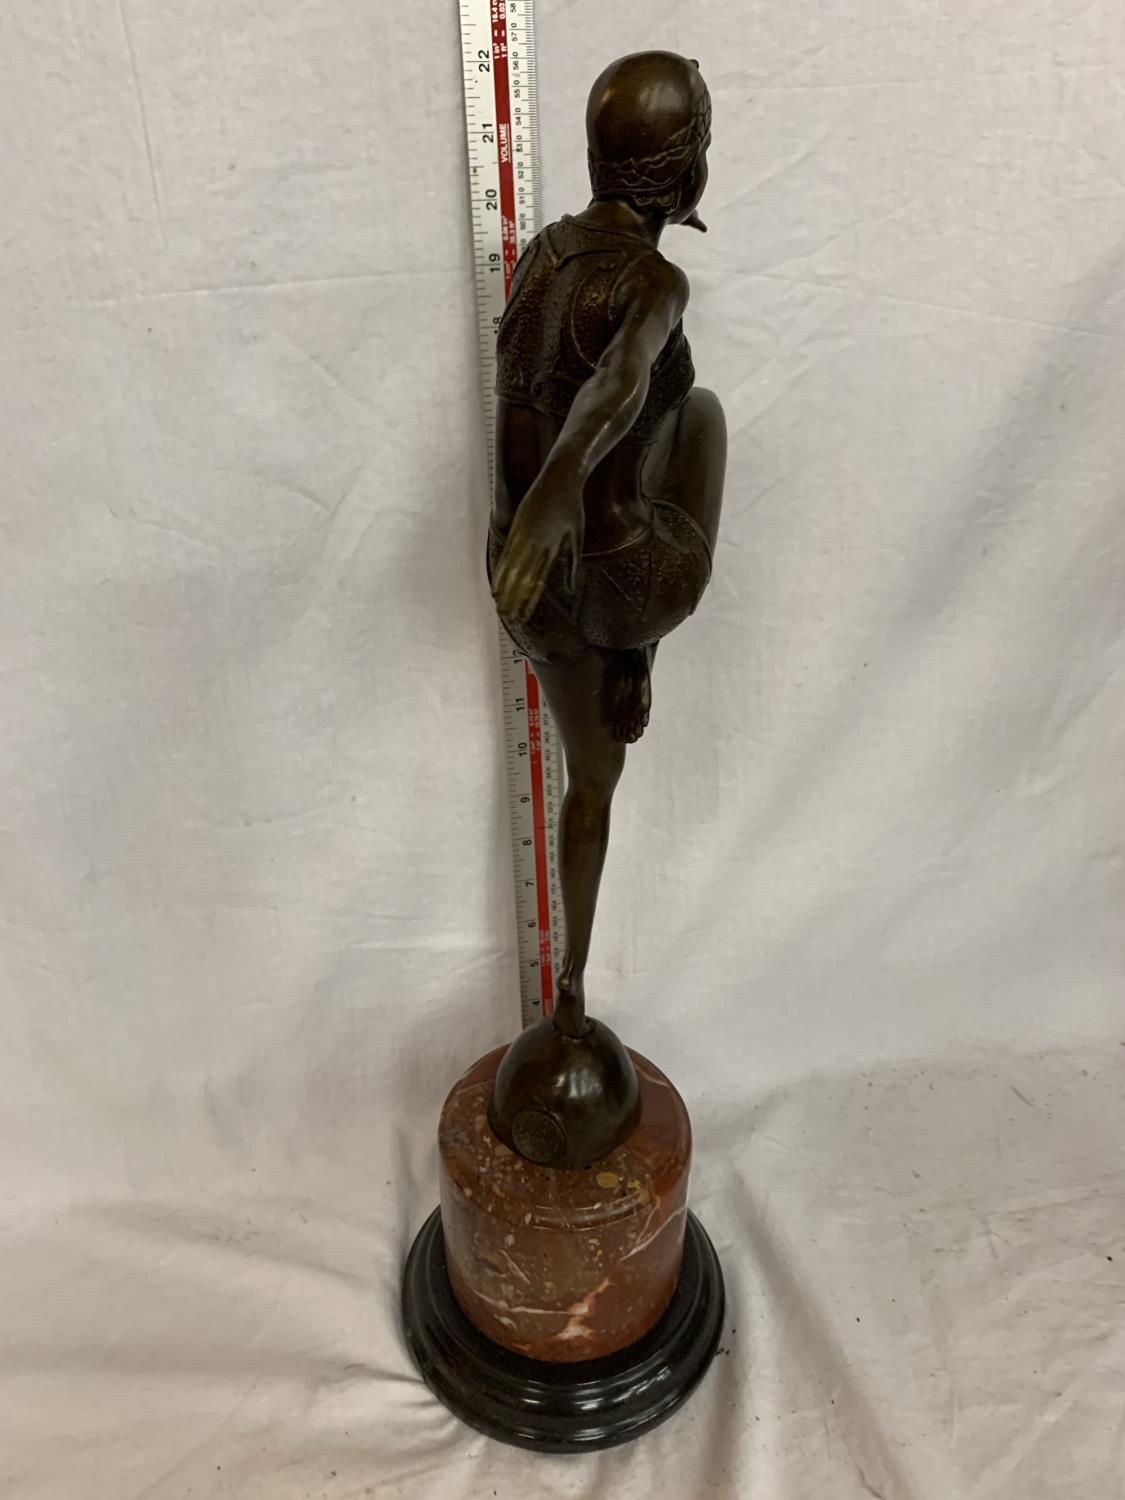 AN ART DECO STYLE BRONZE DANCING LADY ARMS OUT FIGURE ON A MARBLE BASE 52CM - Image 4 of 6